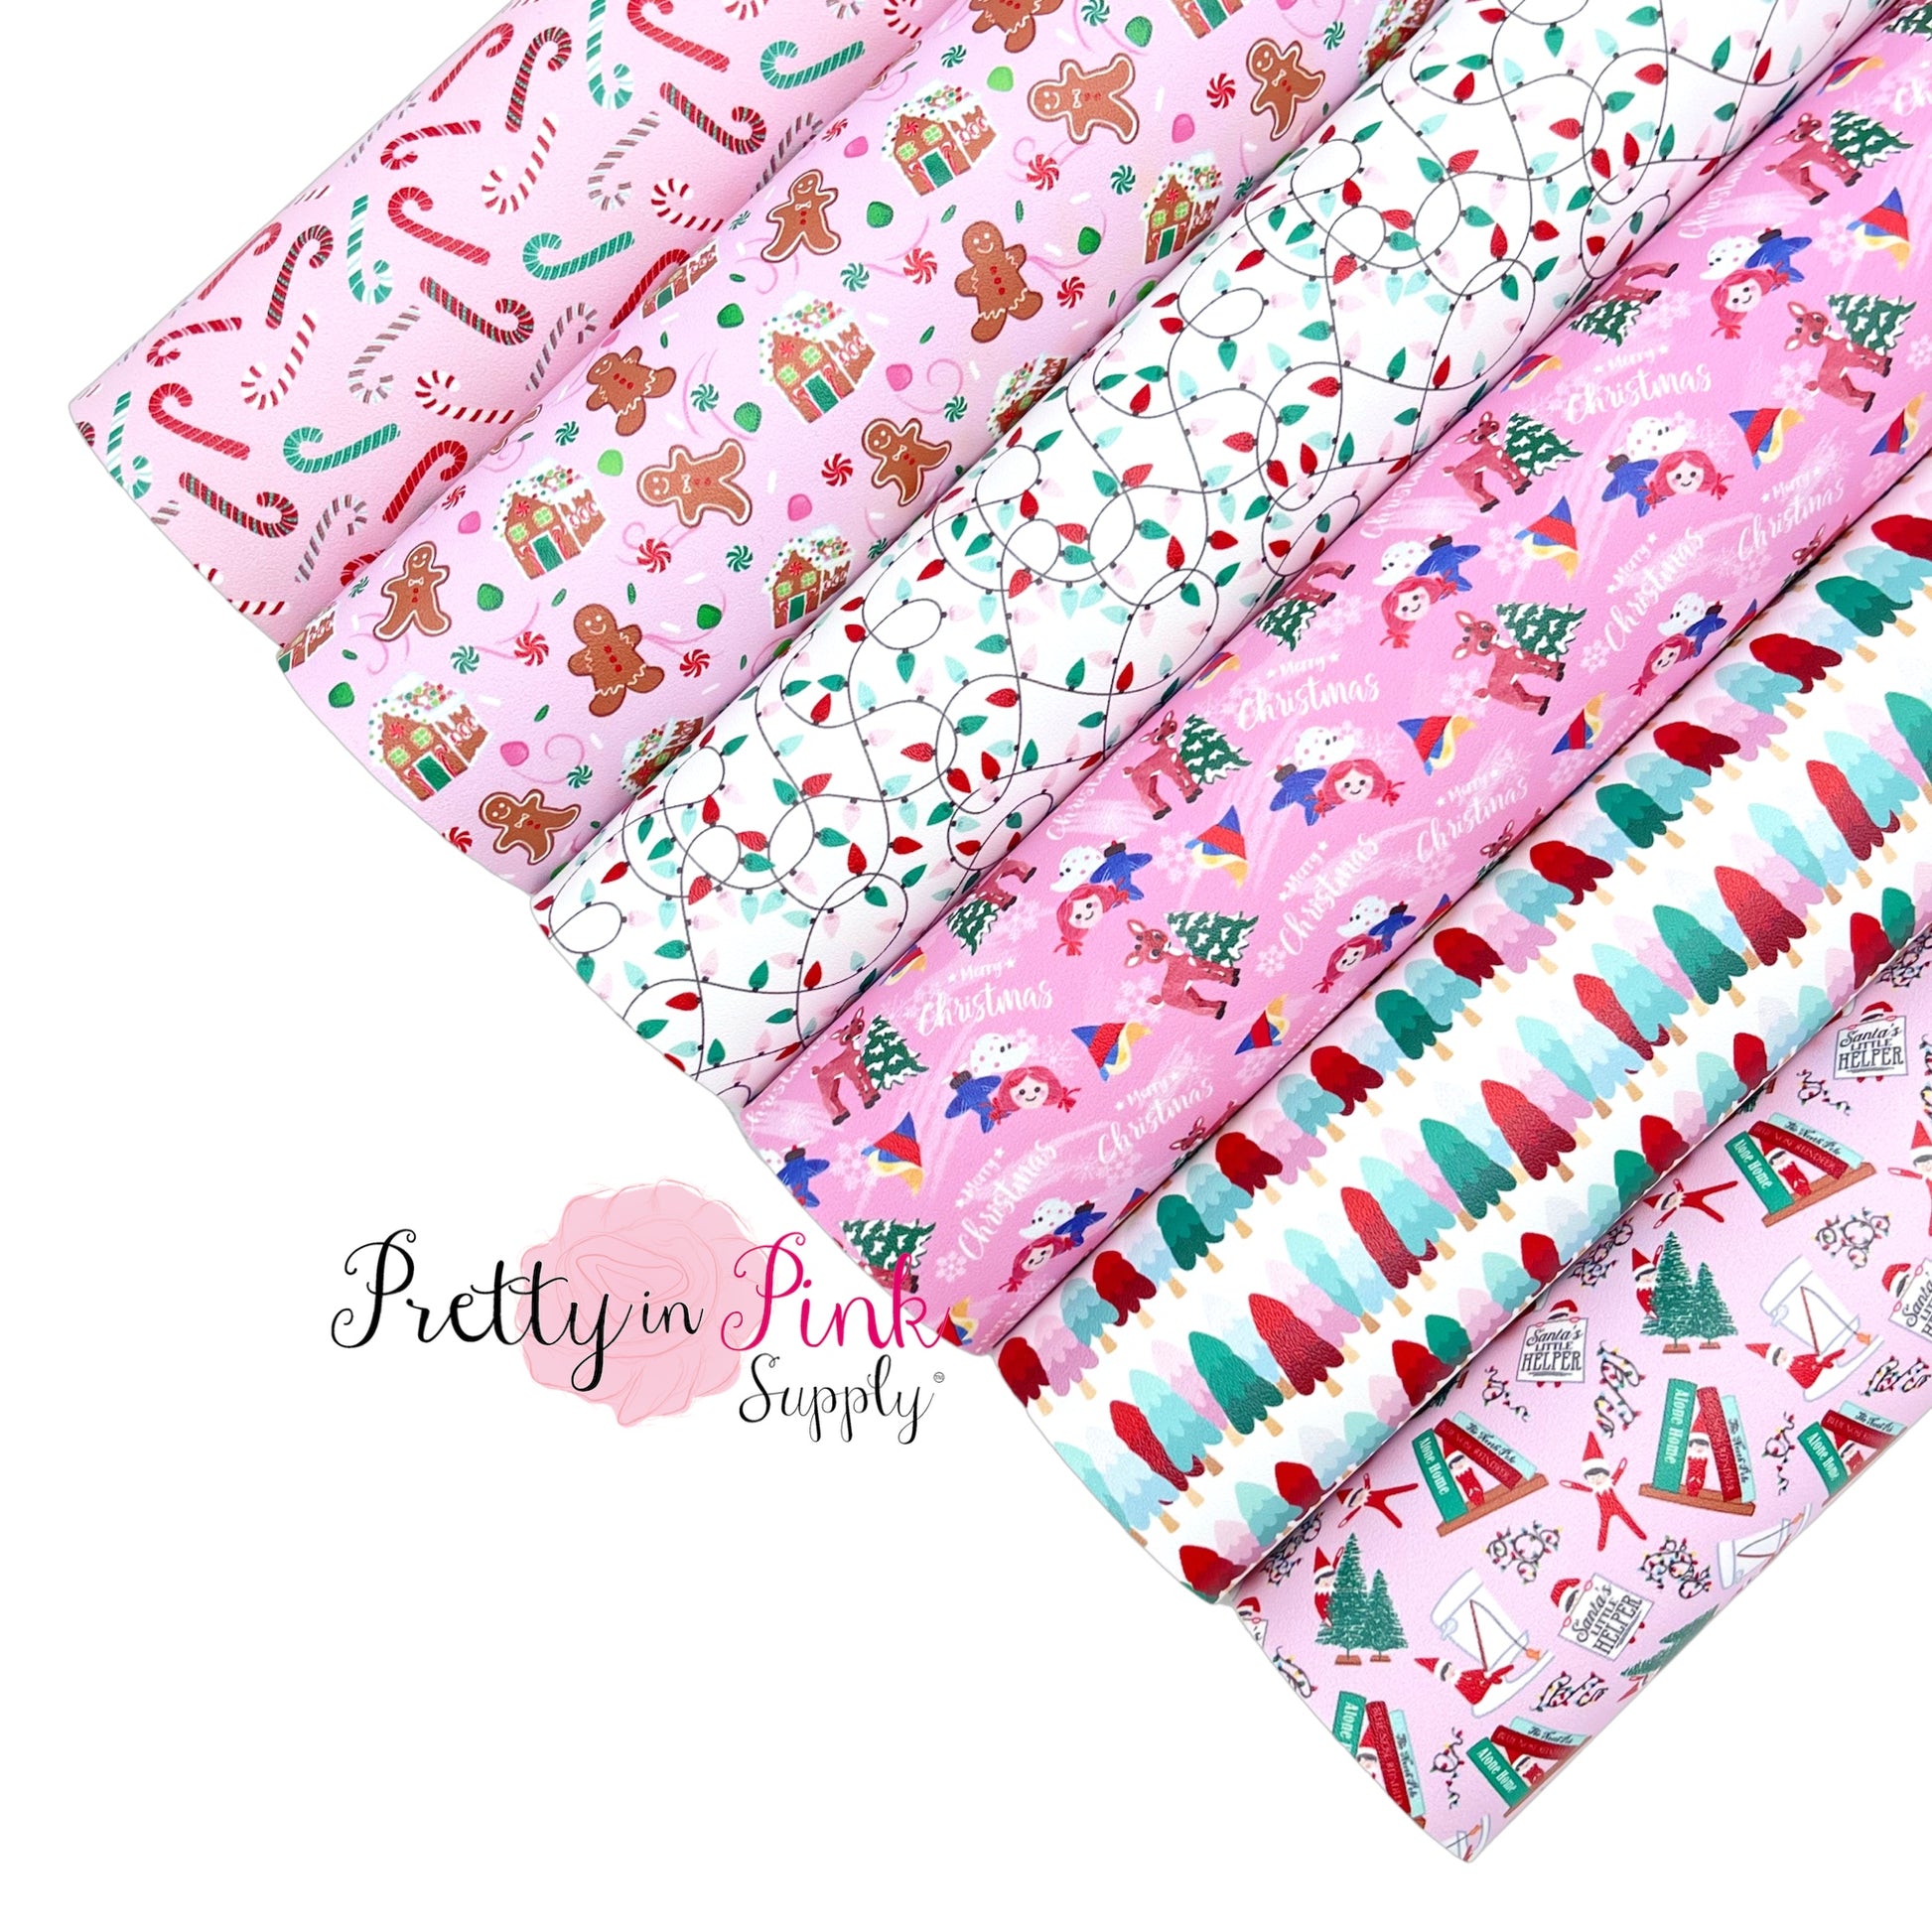 All available merry and bright Pink Christmas patterned faux leather sheets.